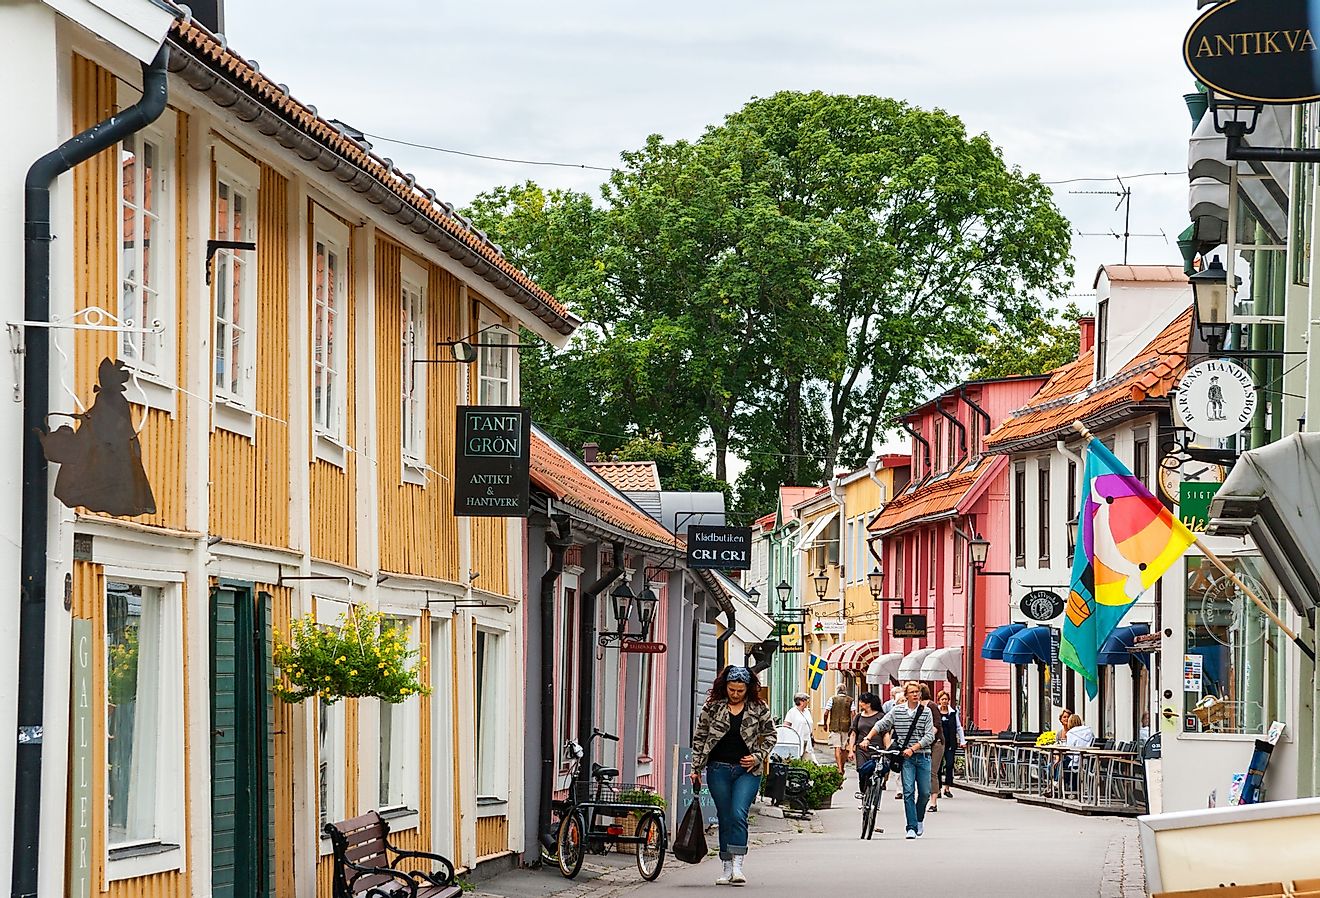 Traditional wooden houses on Stora Gatan street in heart of old town, Sigtuna, Sweden. Image credit Andrei Nekrassov via Shutterstock